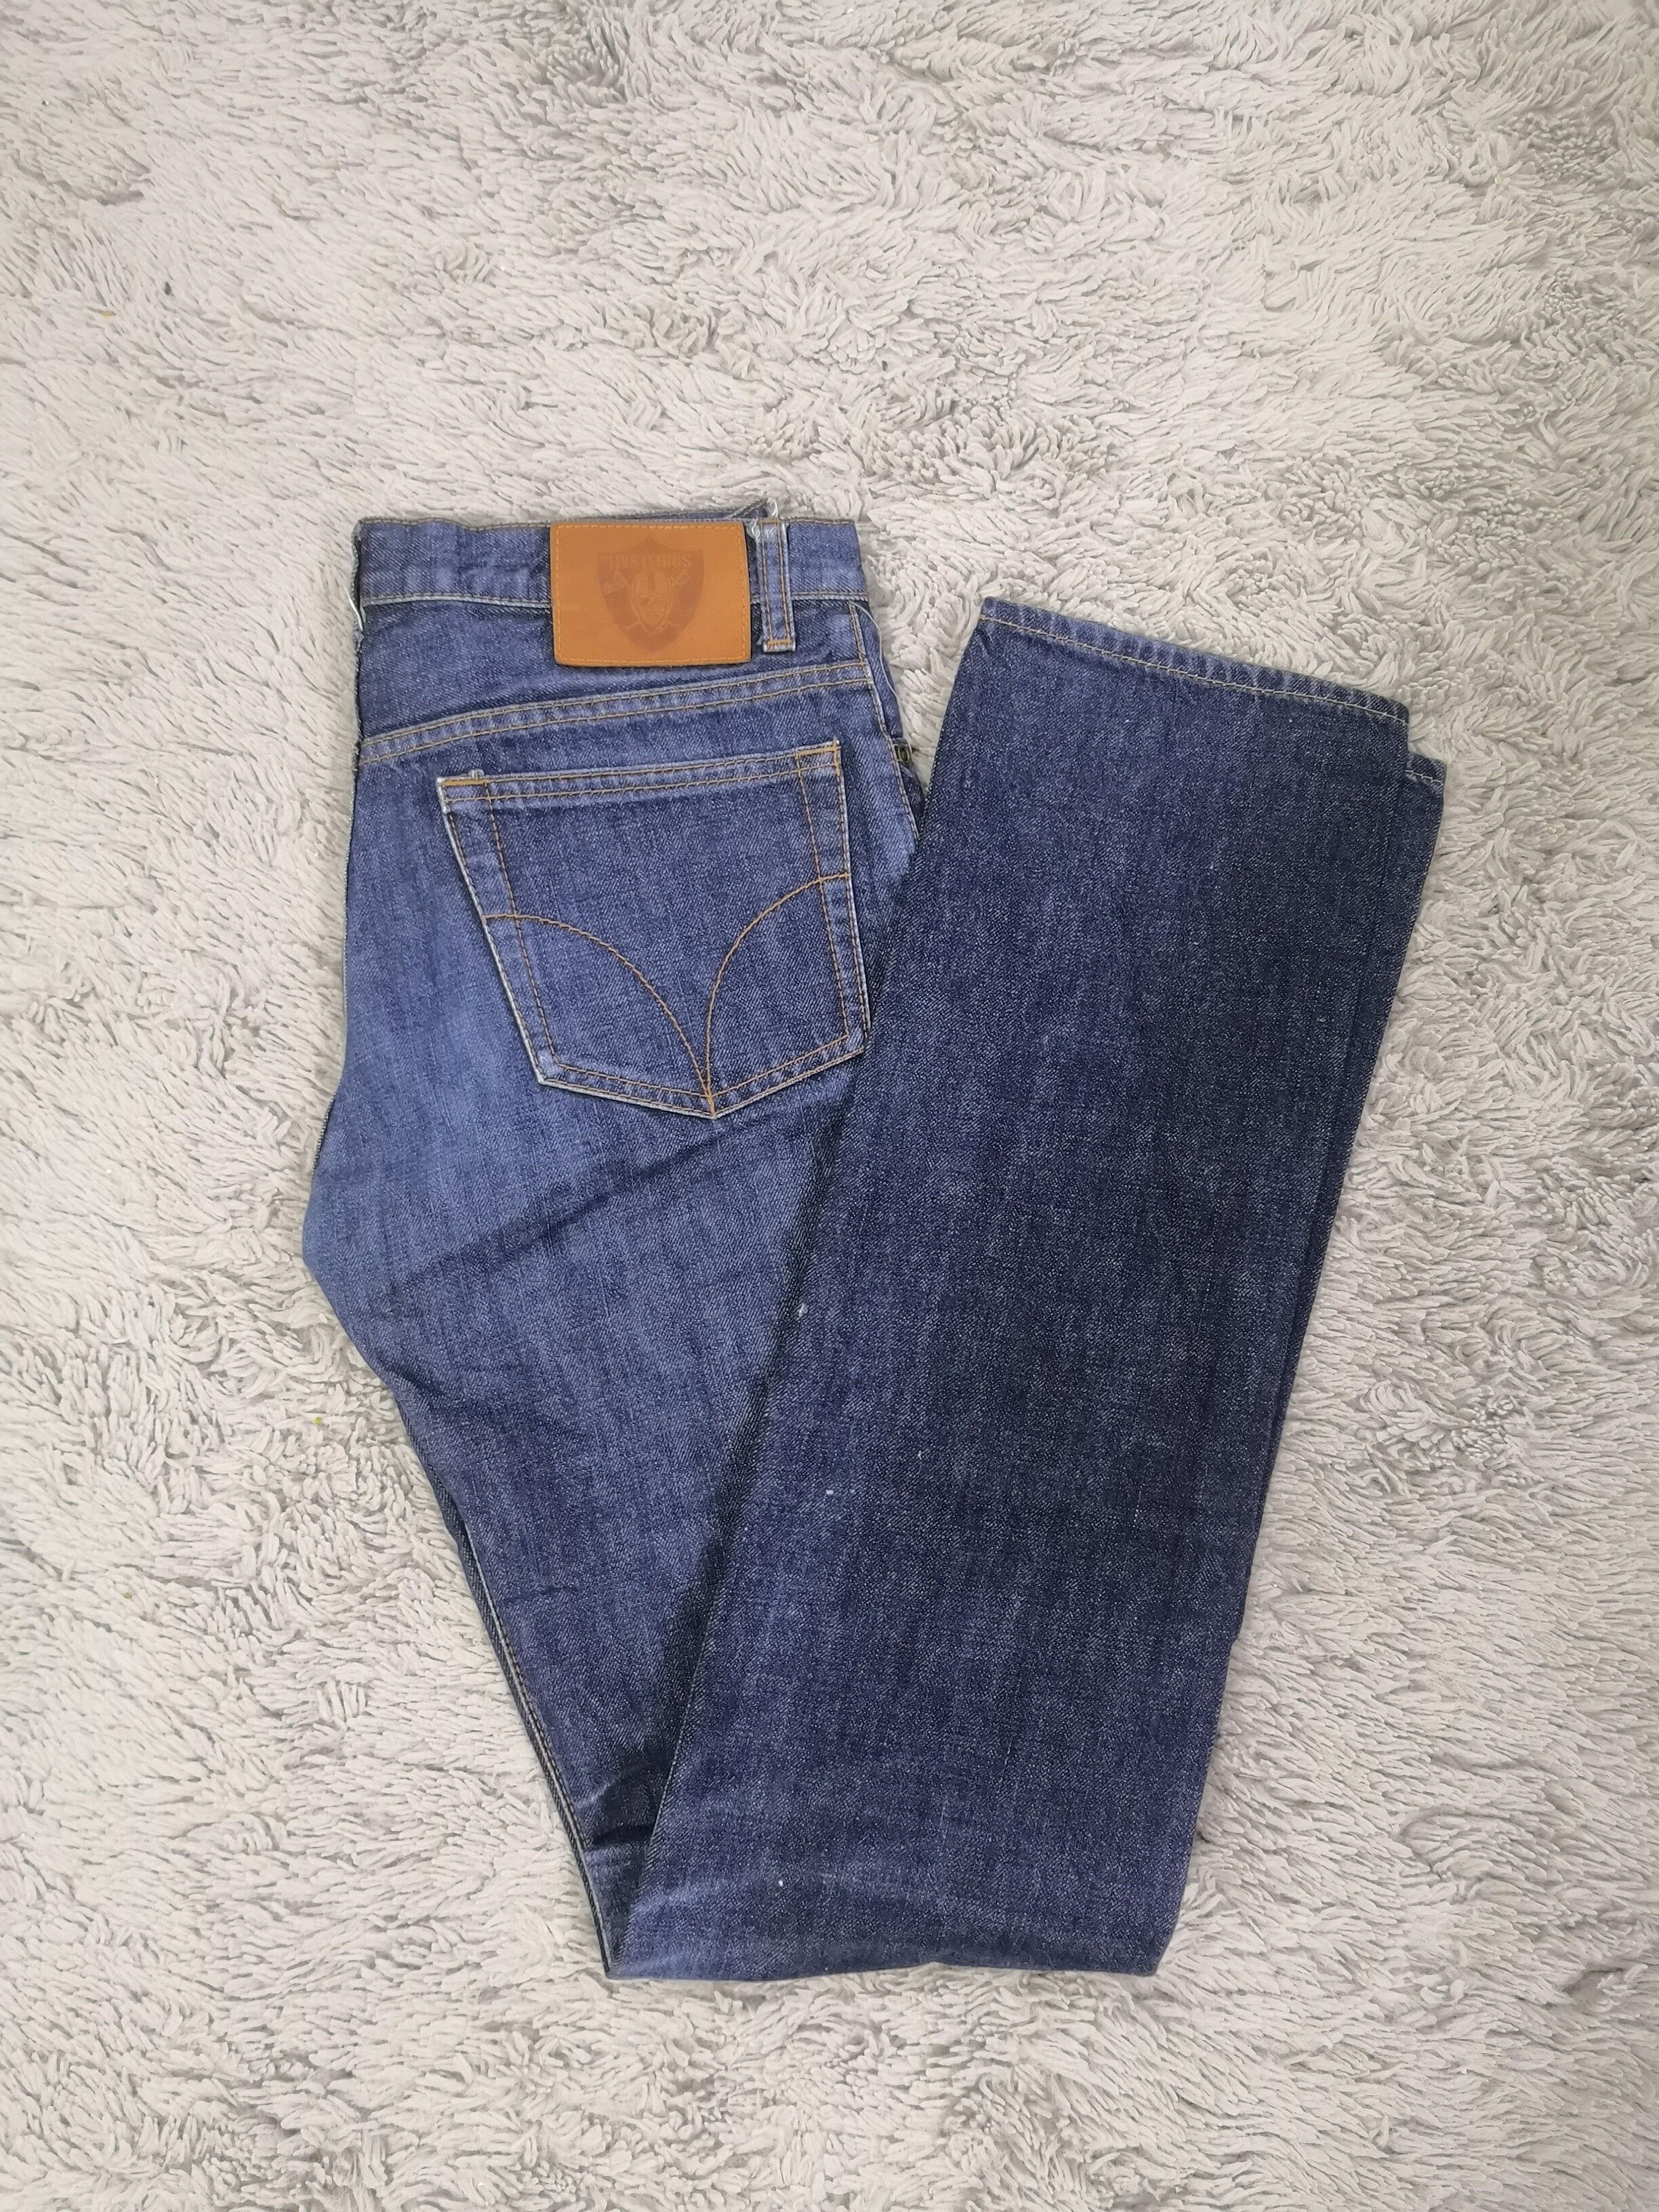 Vintage Hysteric Glamour Low Rise Jeans - 1